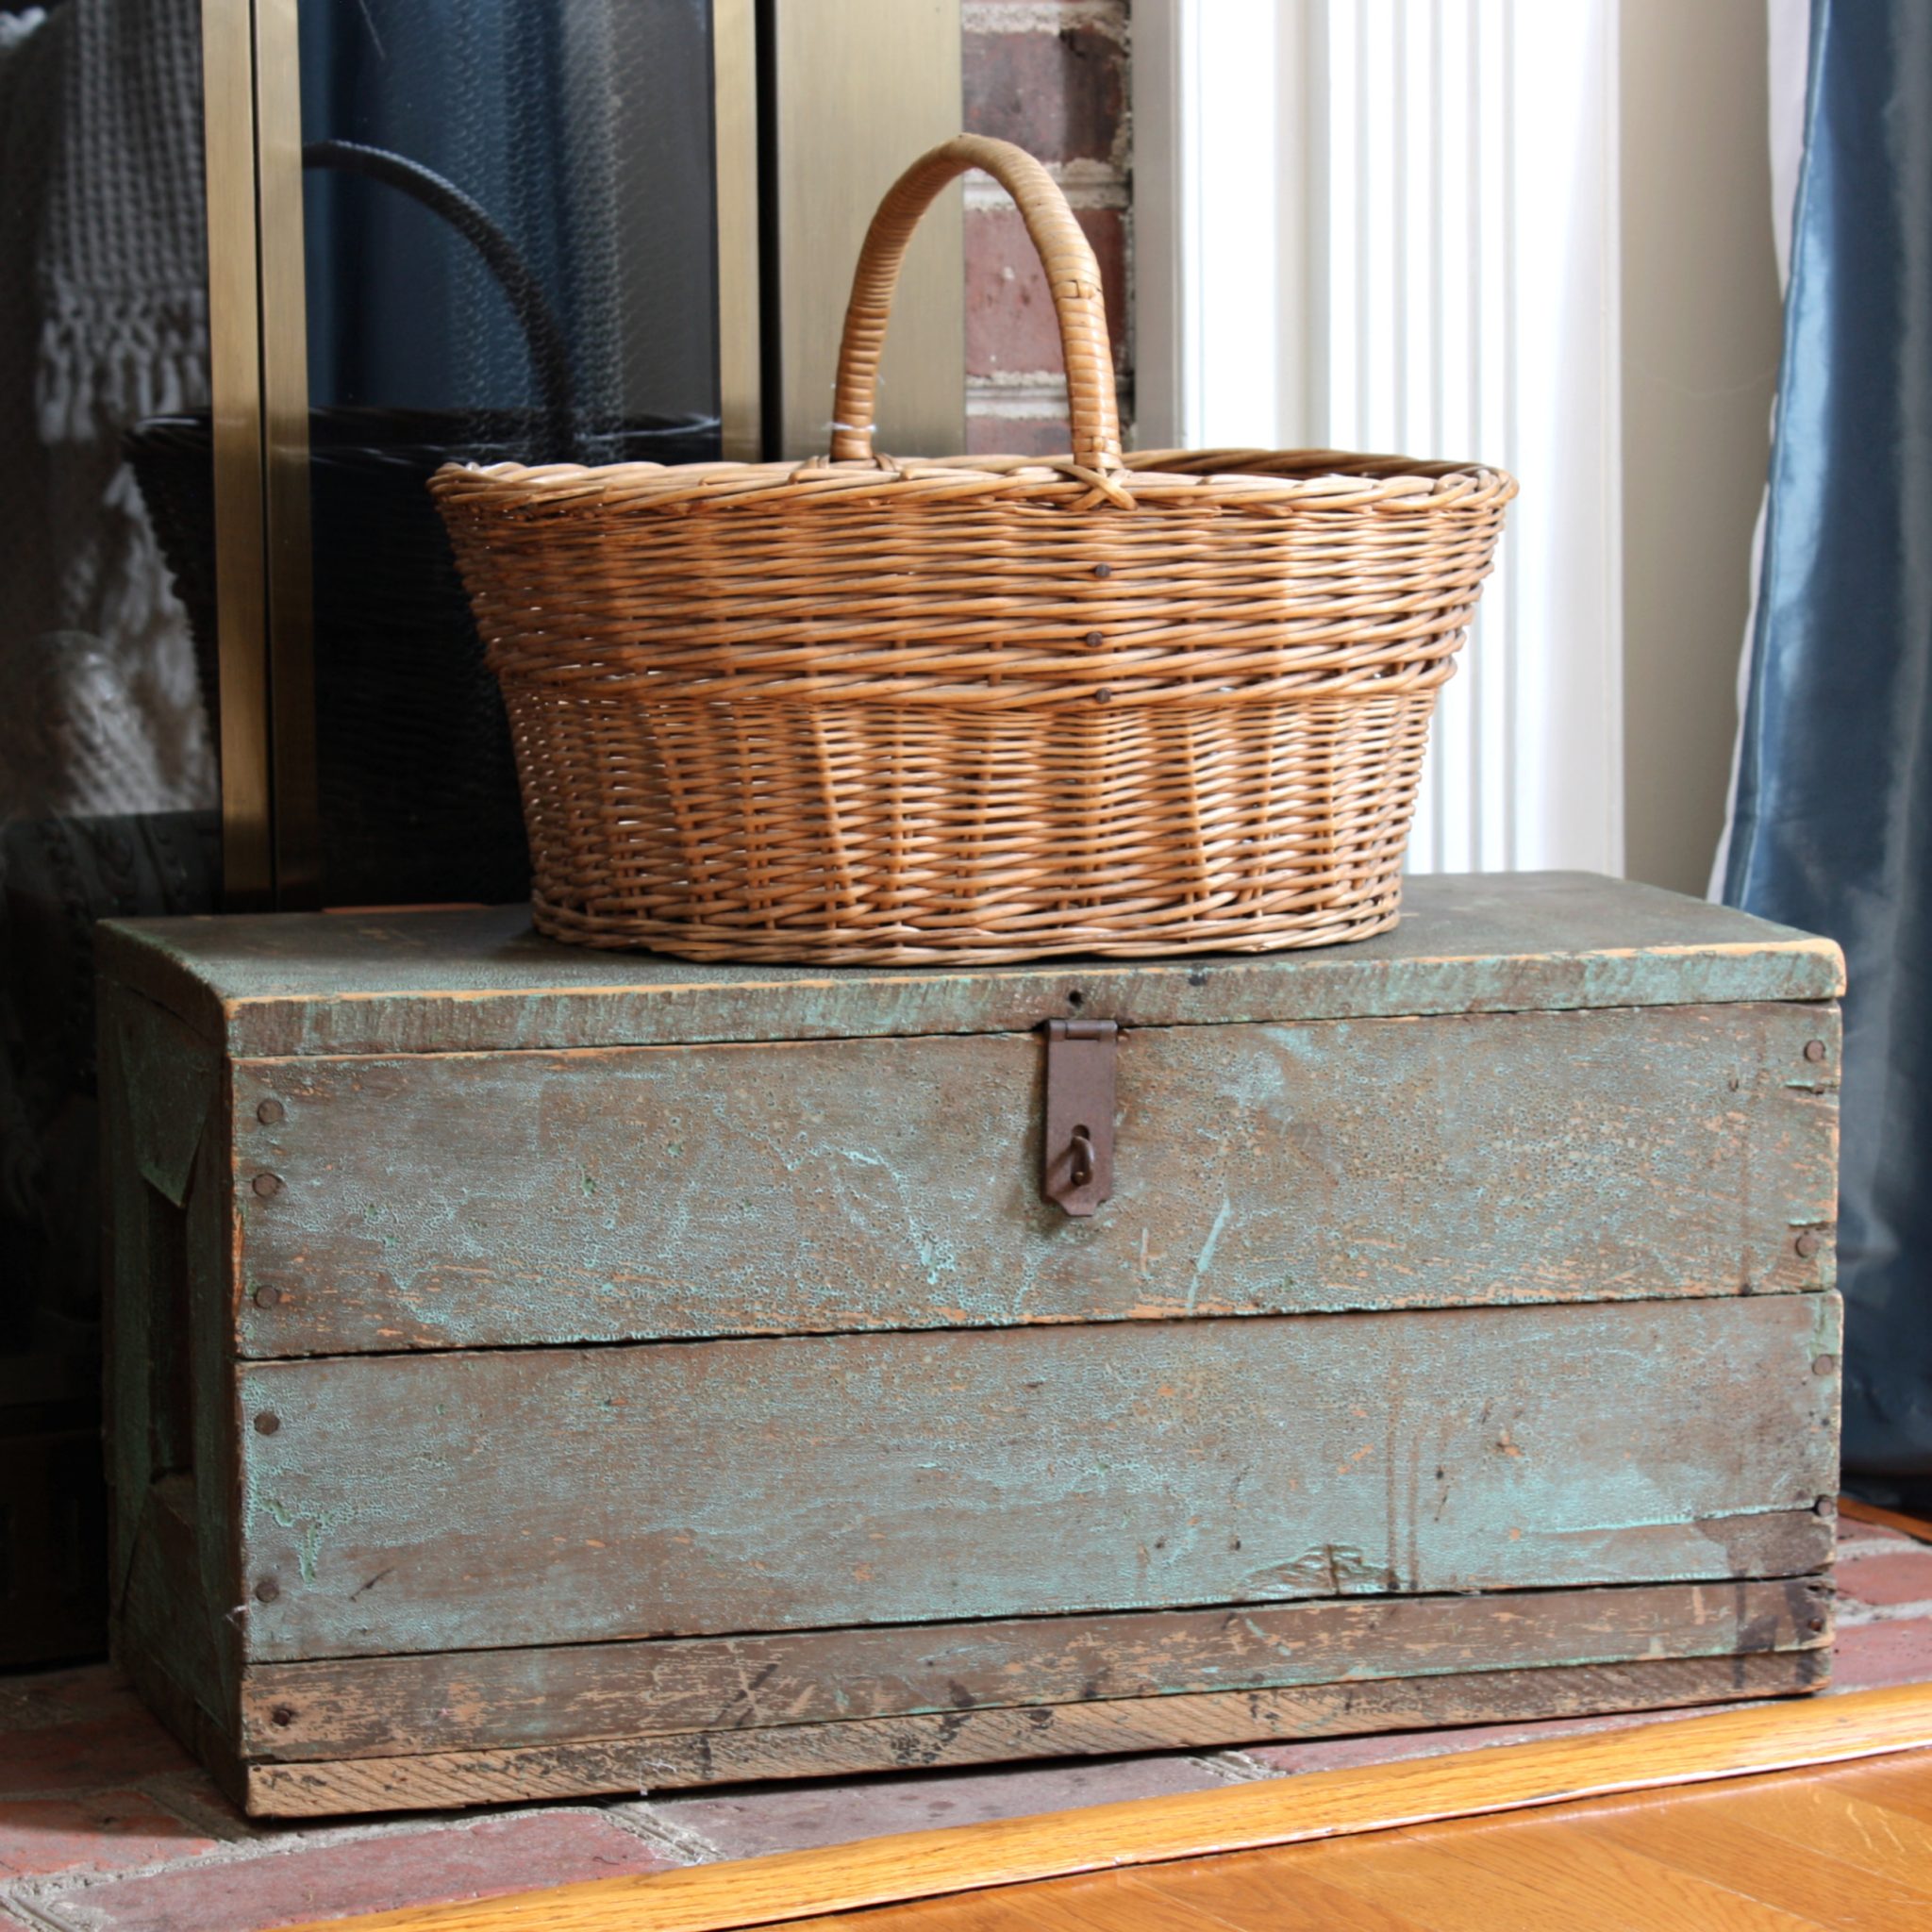 Vintage toolbox with a vintage basket on top of it.